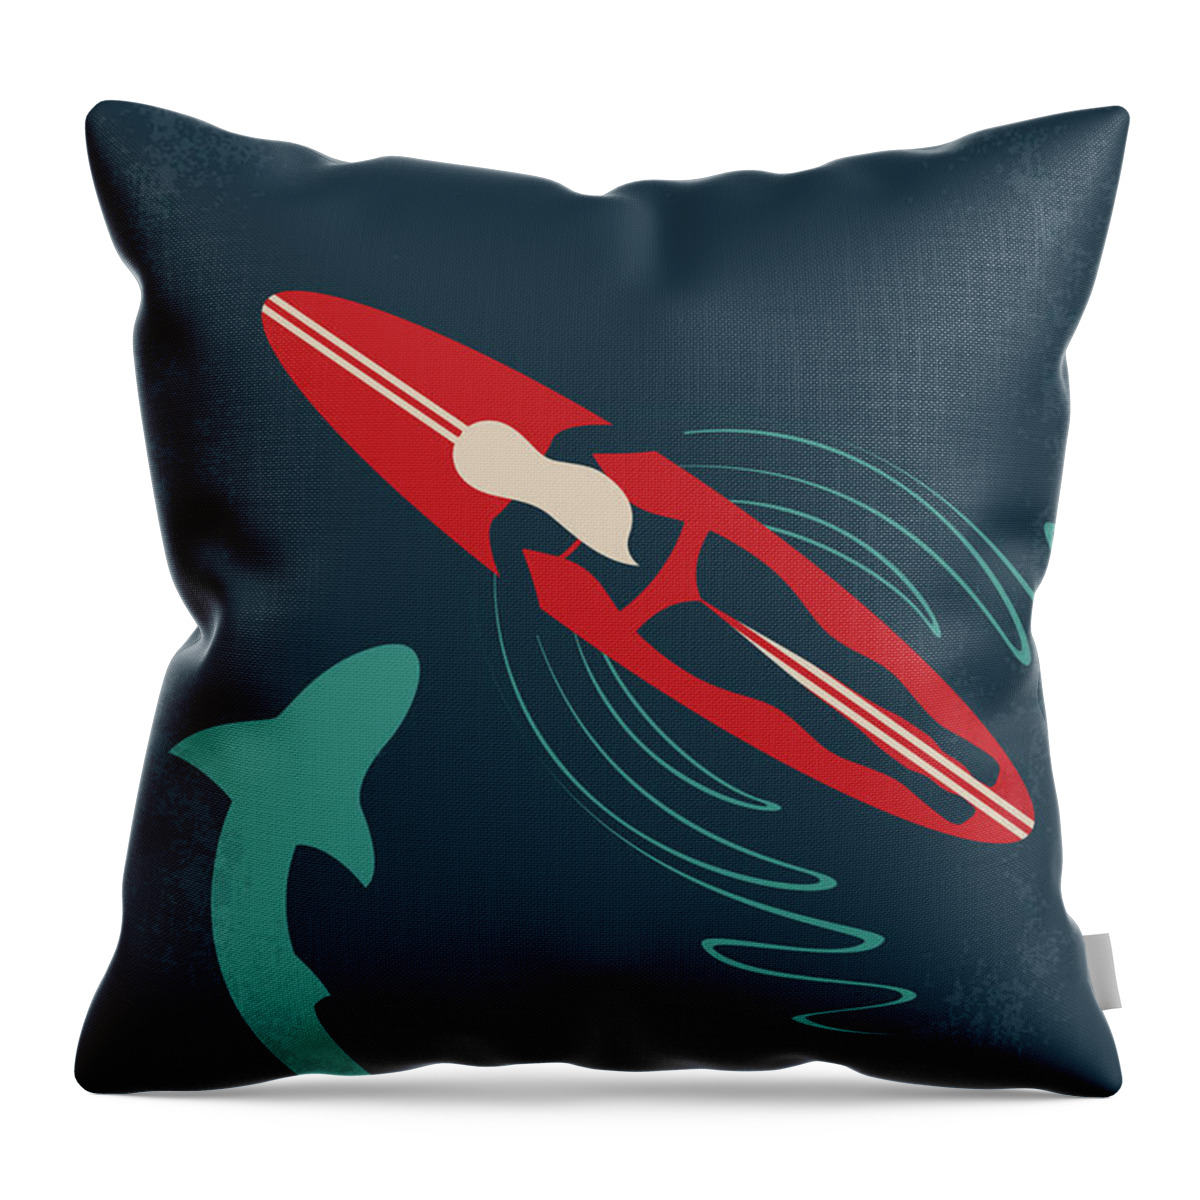 The Shallows Throw Pillow featuring the digital art No836 My The Shallows minimal movie poster by Chungkong Art